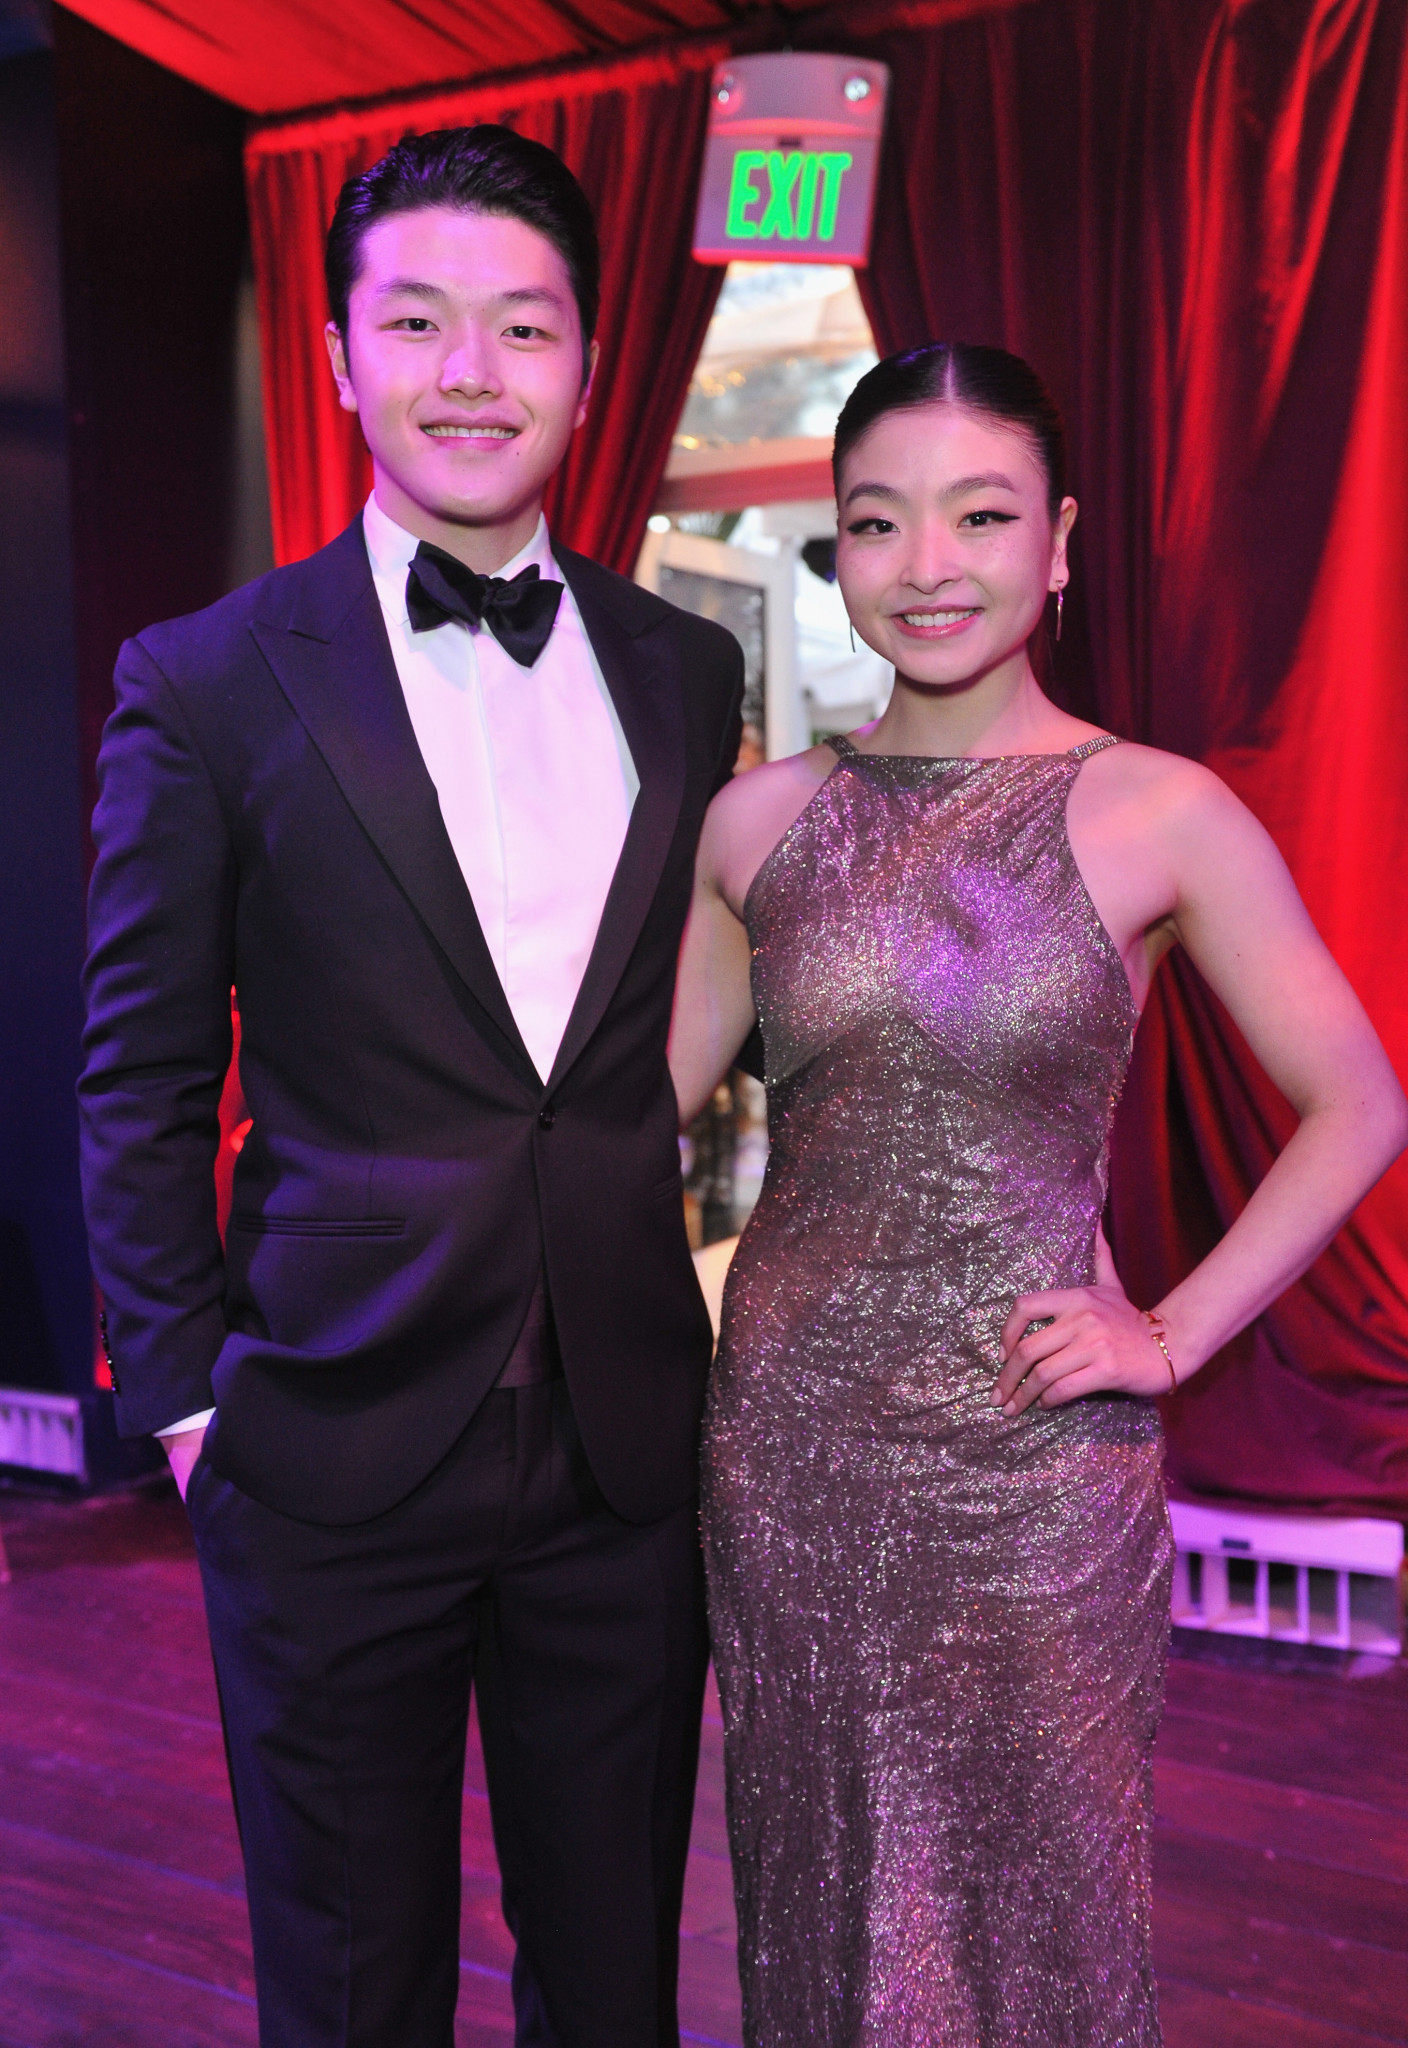 Siblings Alex and Maia Shibutani will miss the 2019-2020 competition circuit to focus on other projects © Getty Images